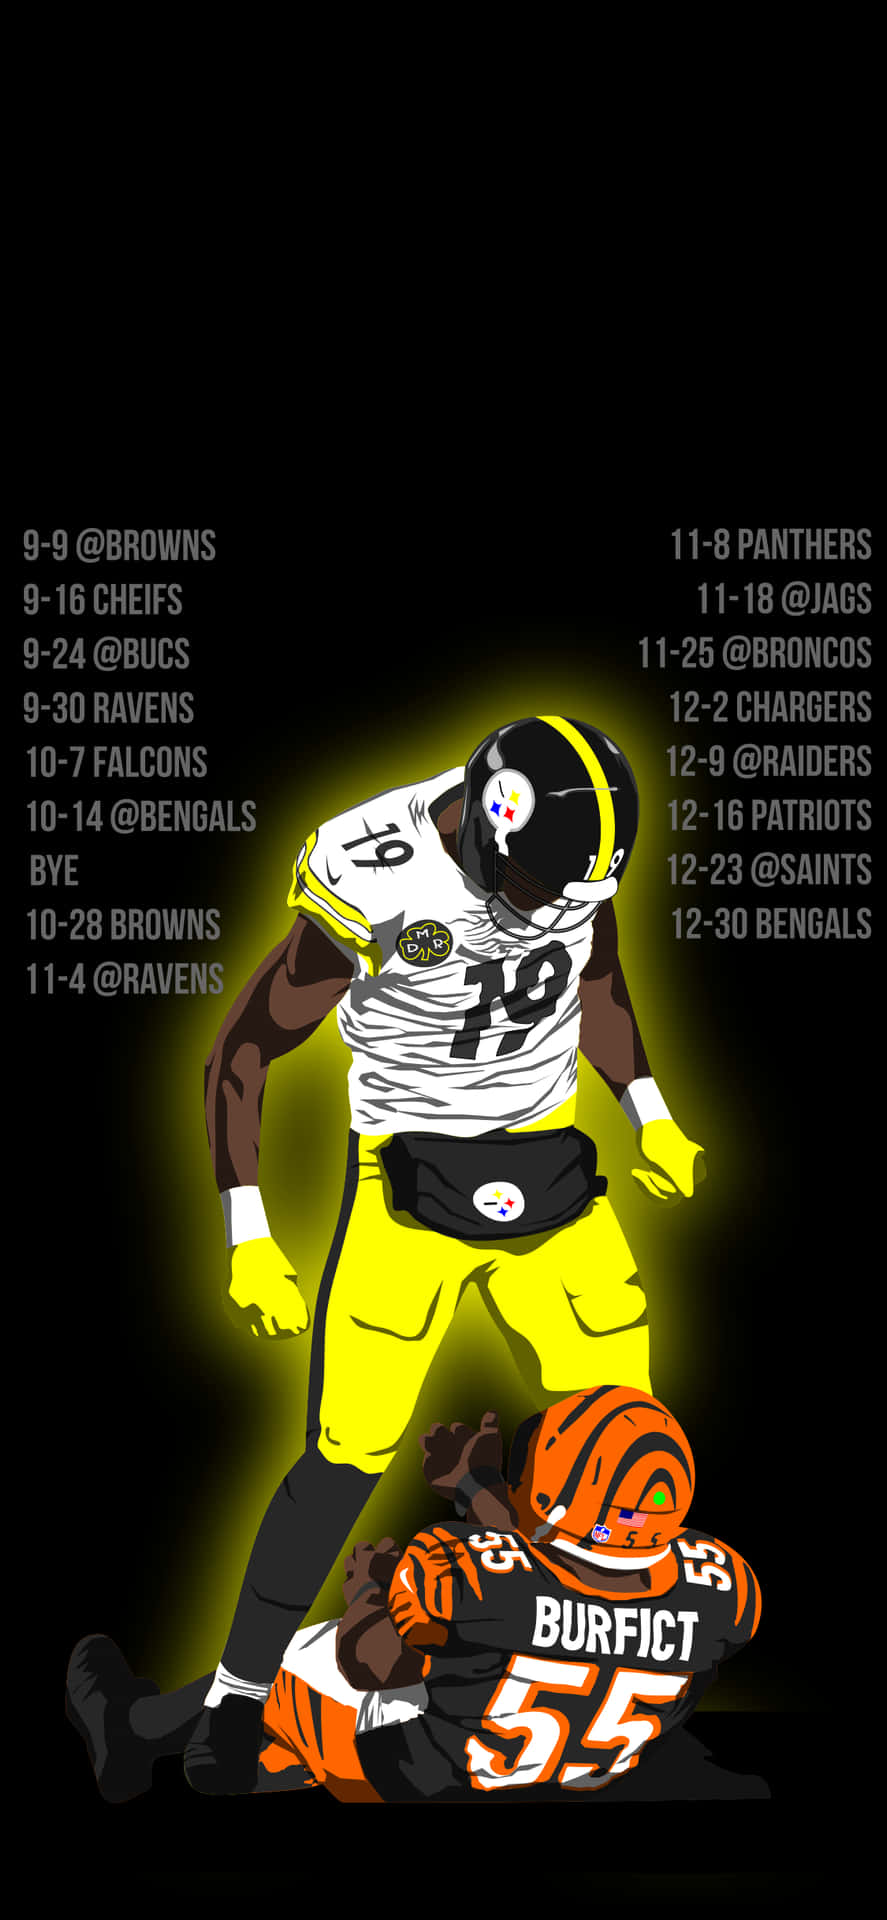 Harness the power of the Pittsburgh Steelers with this custom iPhone case! Wallpaper